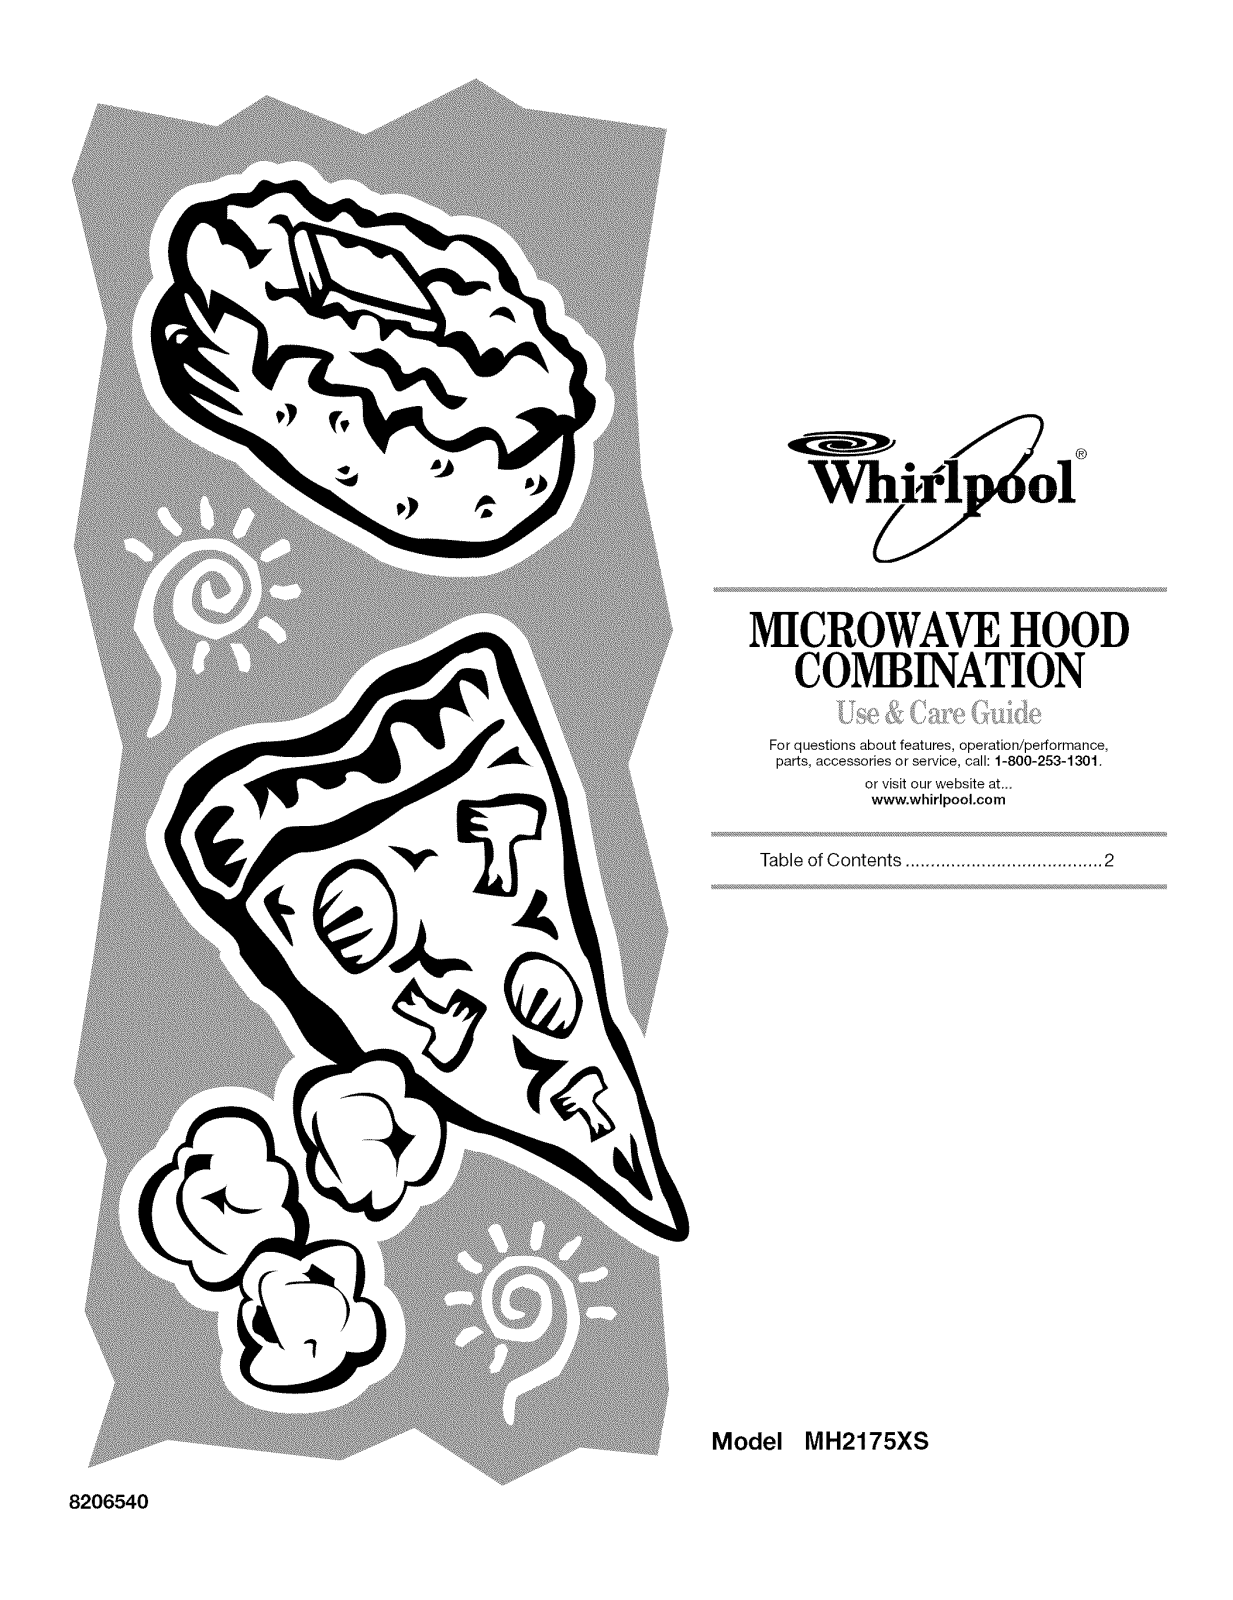 Whirlpool MH2175XSB0, MH2175XSQ0, MH2175XSS0, MH2175XST0 Owner’s Manual